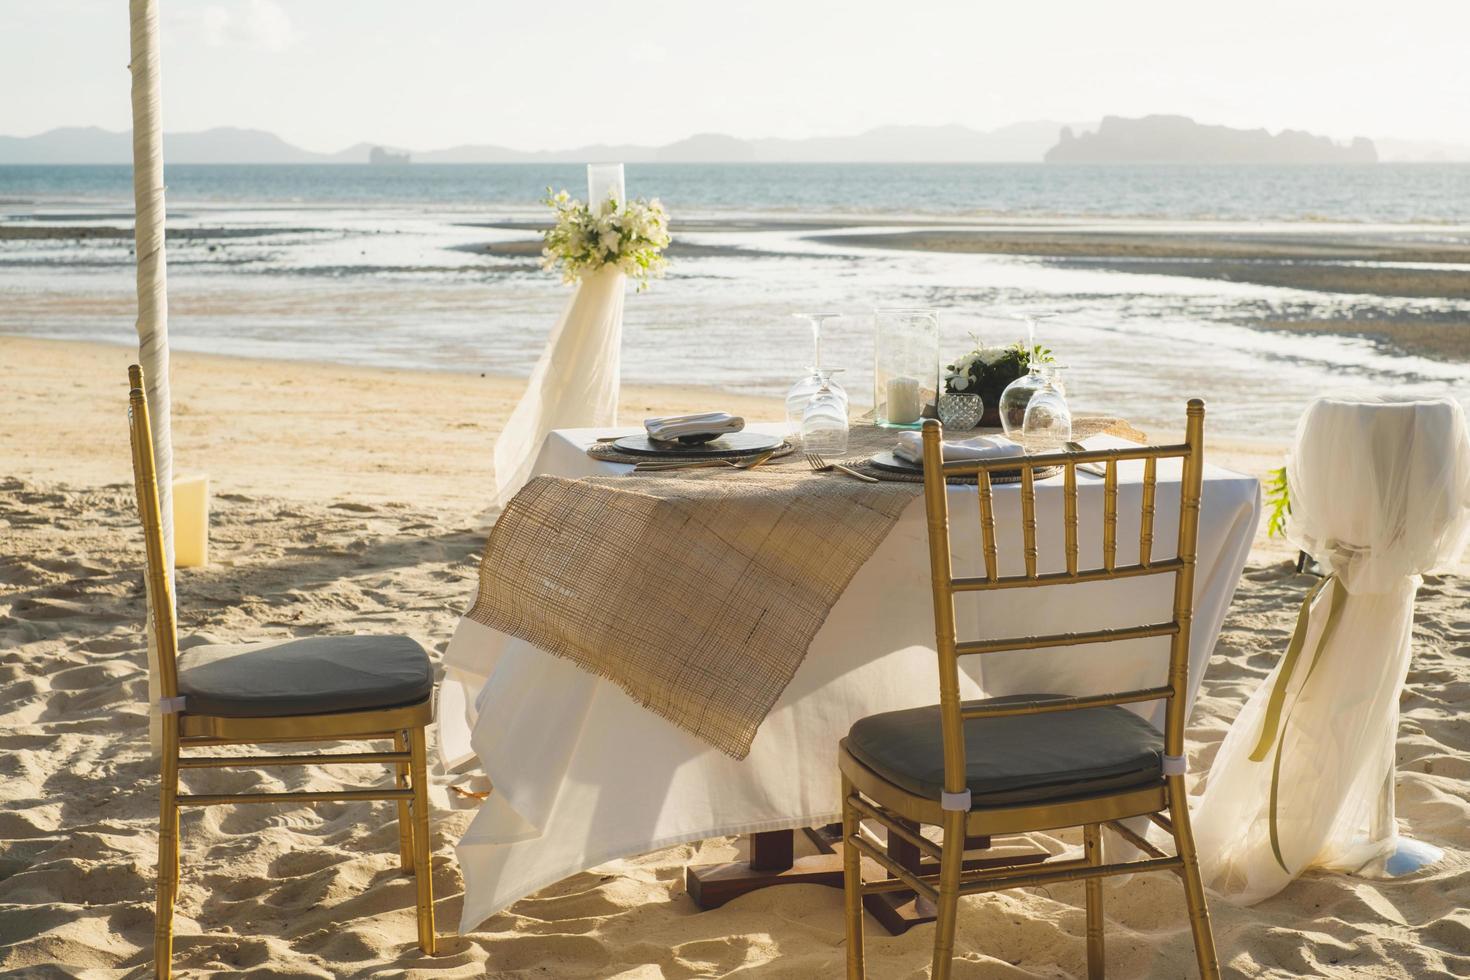 Beautiful table set up for a romantic dinner on the beach with  flowers and candles. Catering for a romantic date, wedding or honeymoon background. Sunset beach dinner. selected focus. photo